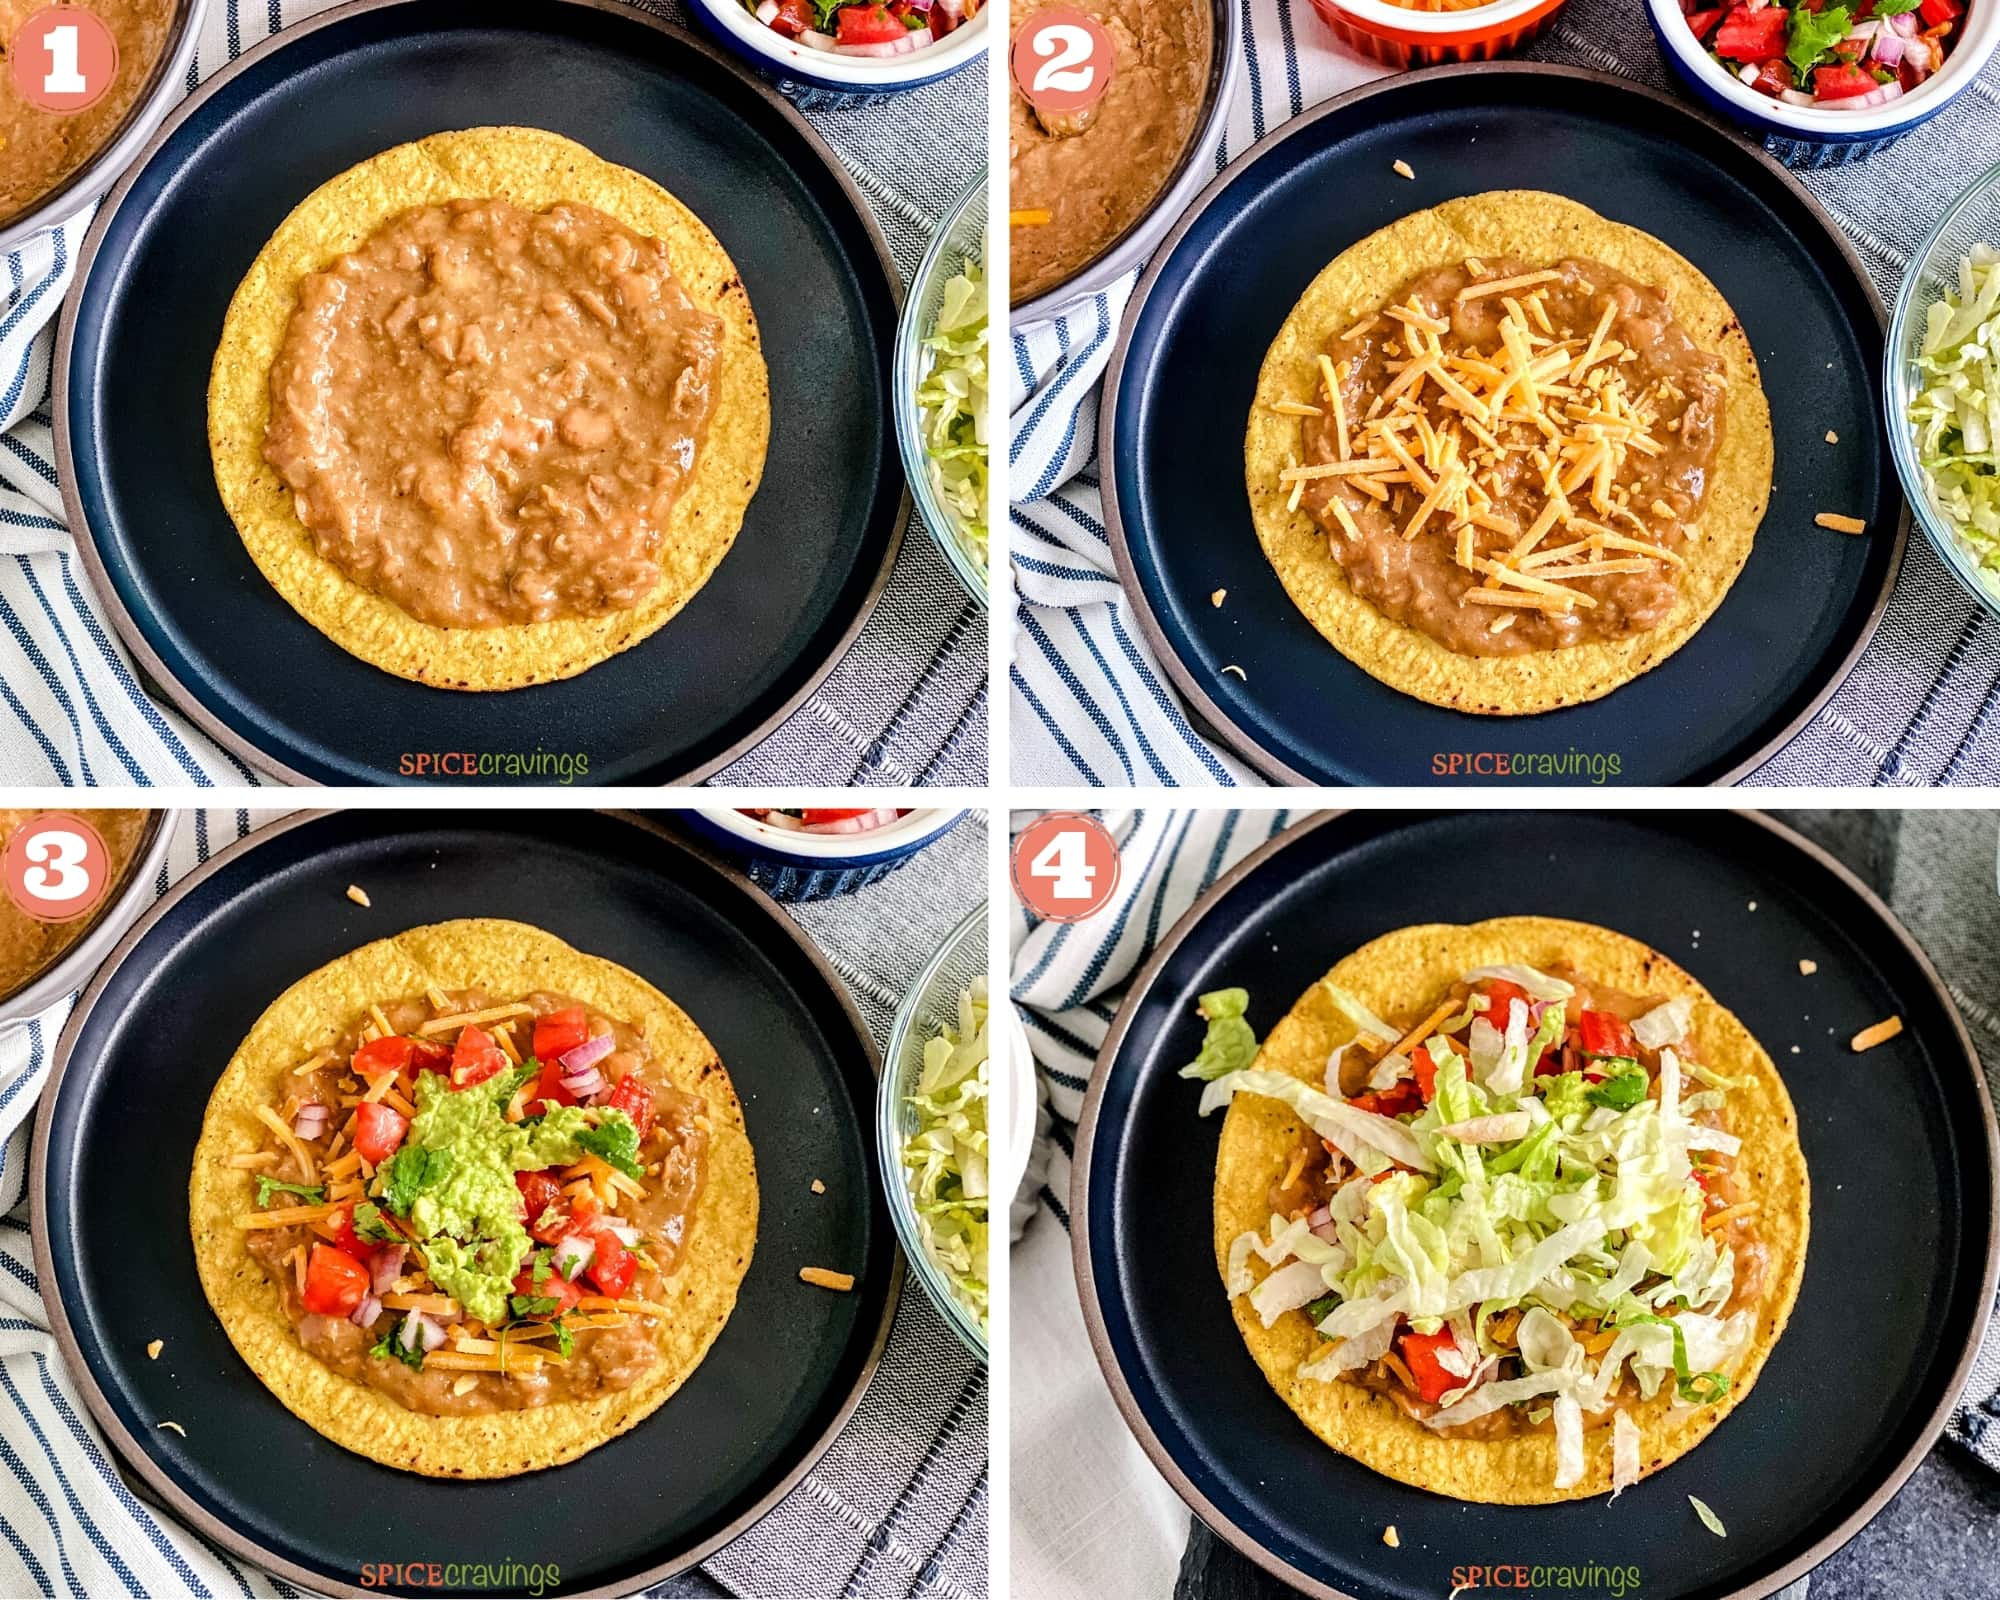 Steps showing how to assemble tostadas